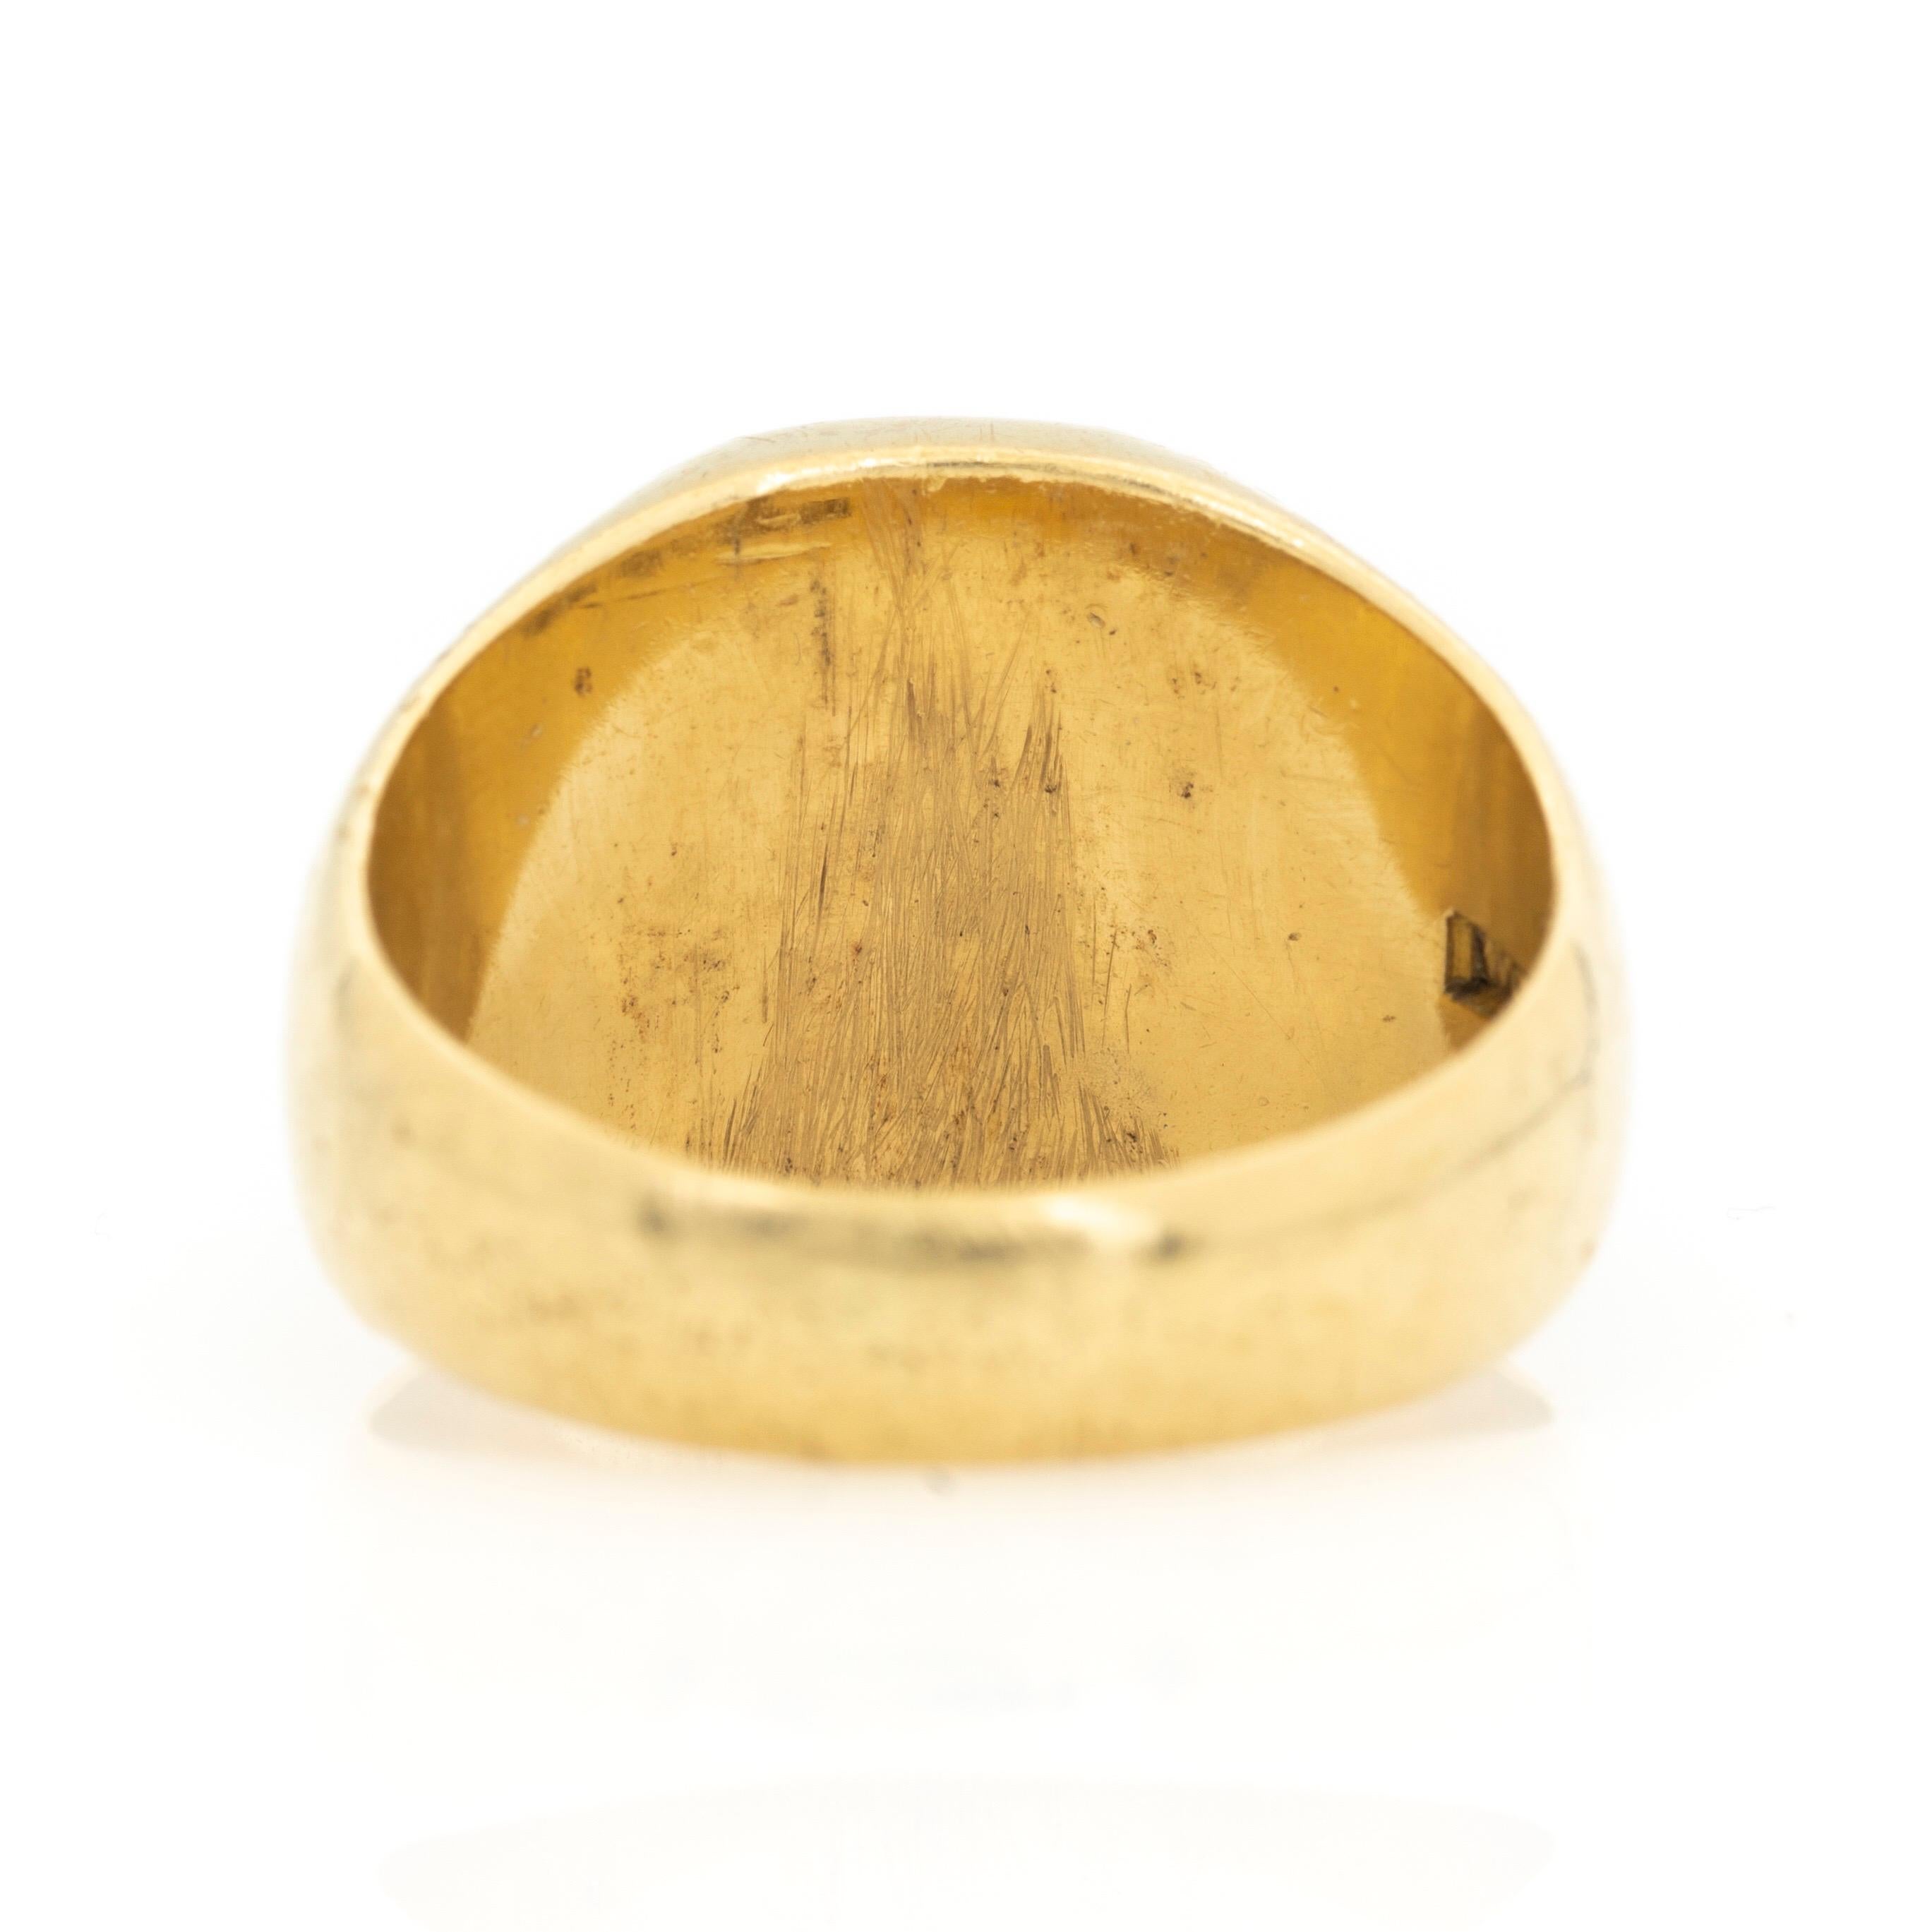 A wonderful 18 Karat yellow gold signet ring made by the esteemed jewelers of the House of BOLIN in the early 20th Century

Currently a size 6 but can be sized.
12 grams